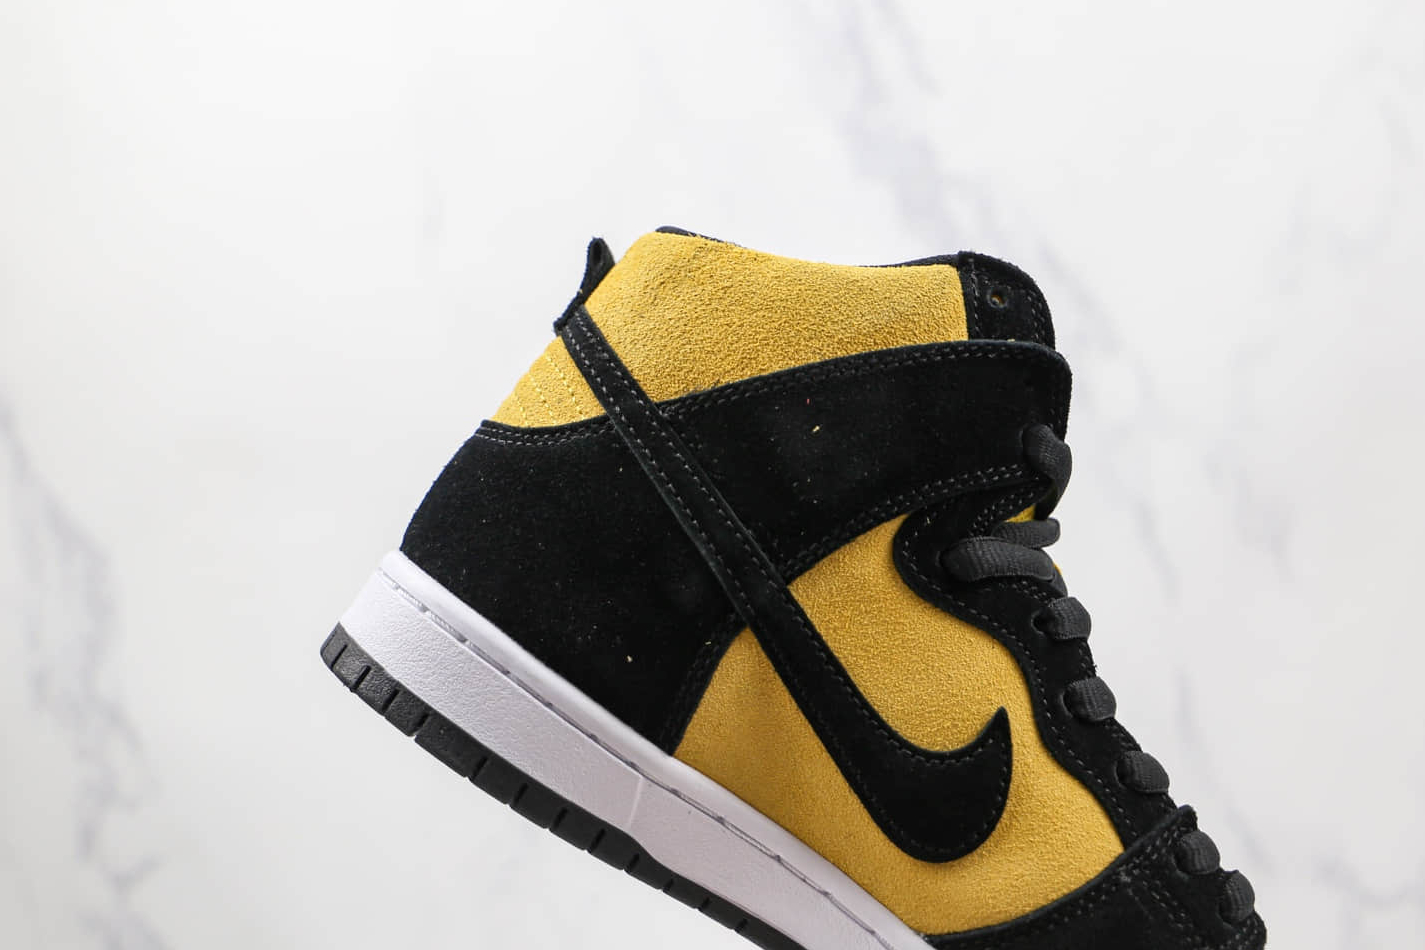 Nike Dunk High Pro SB 'Reverse Goldenrod' DB1640-001 | Limited Edition Skateboarding Sneakers